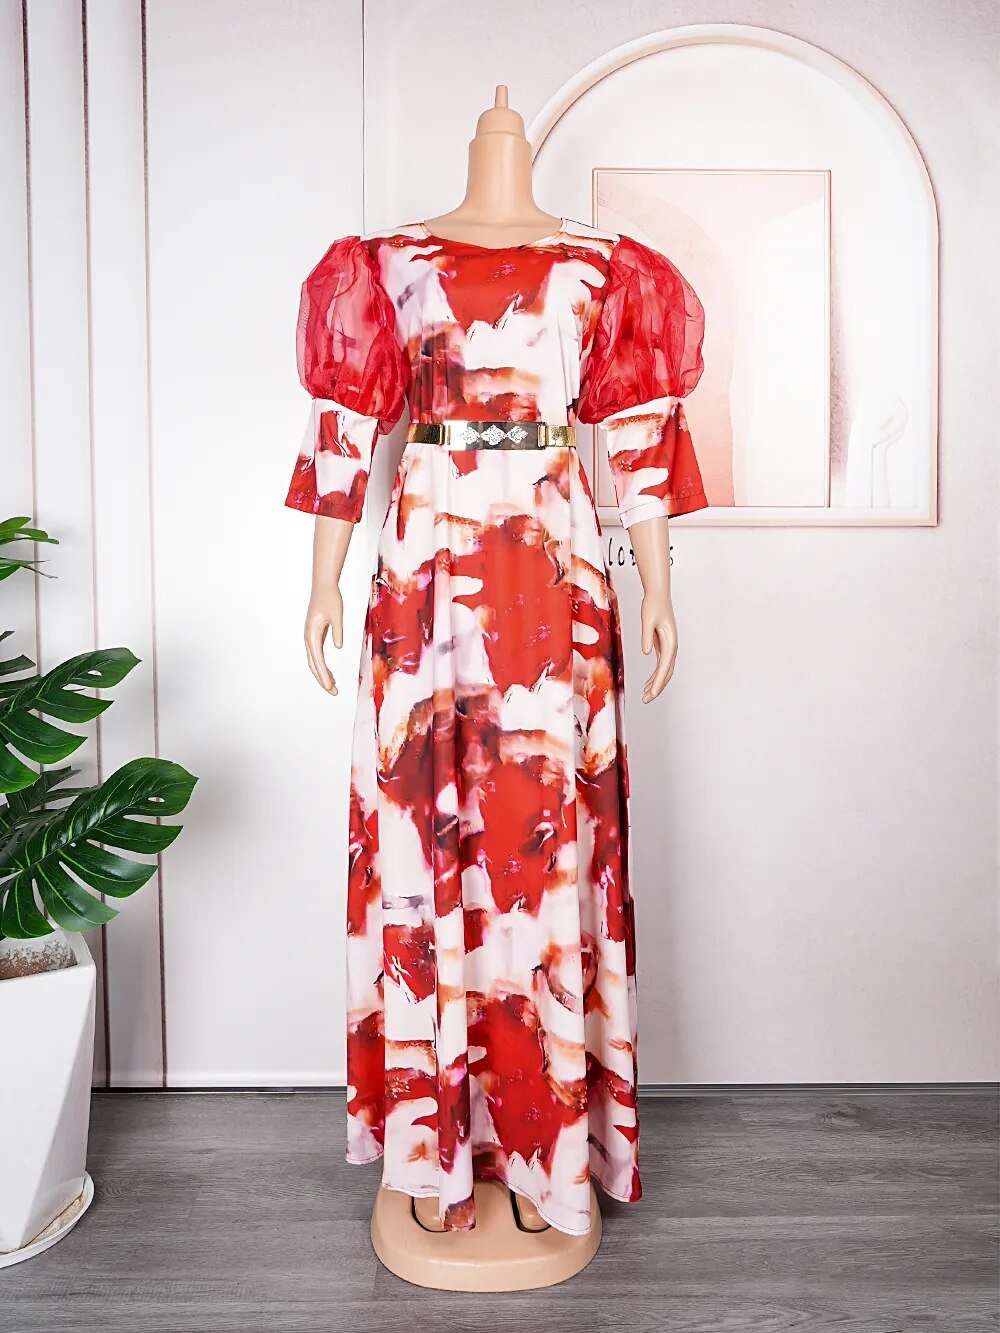 Elegant African Maxi Evening Dresses: Plus-Size Chic in Kaftan Chiffon - Flexi Africa - Flexi Africa offers Free Delivery Worldwide - Vibrant African traditional clothing showcasing bold prints and intricate designs